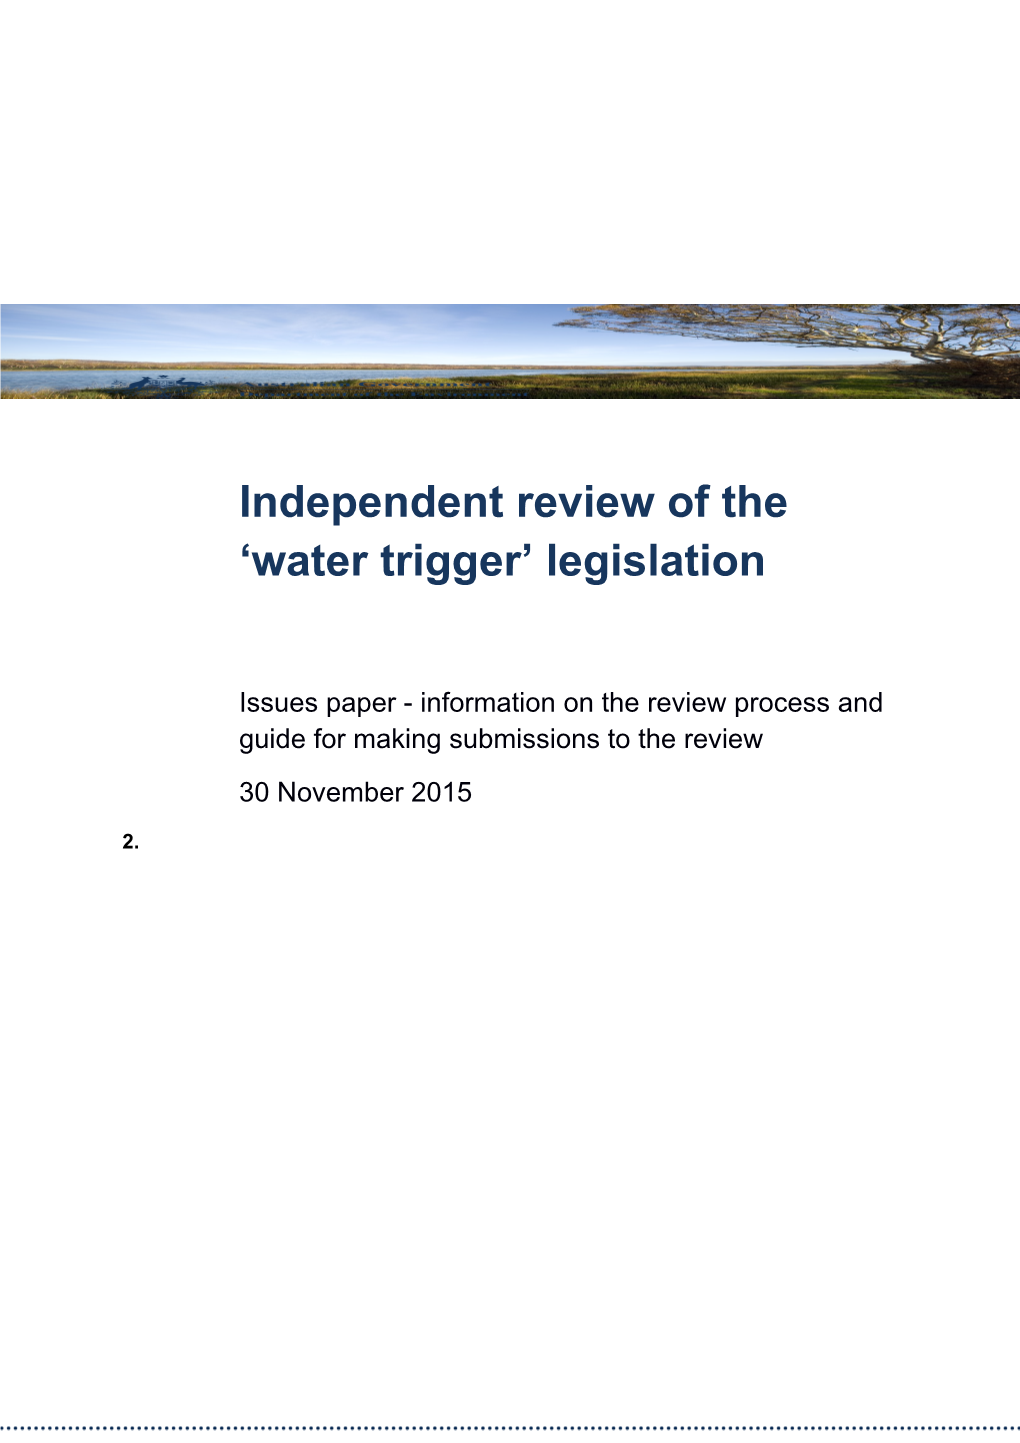 Issues Paper Outline- Review of the Water Trigger